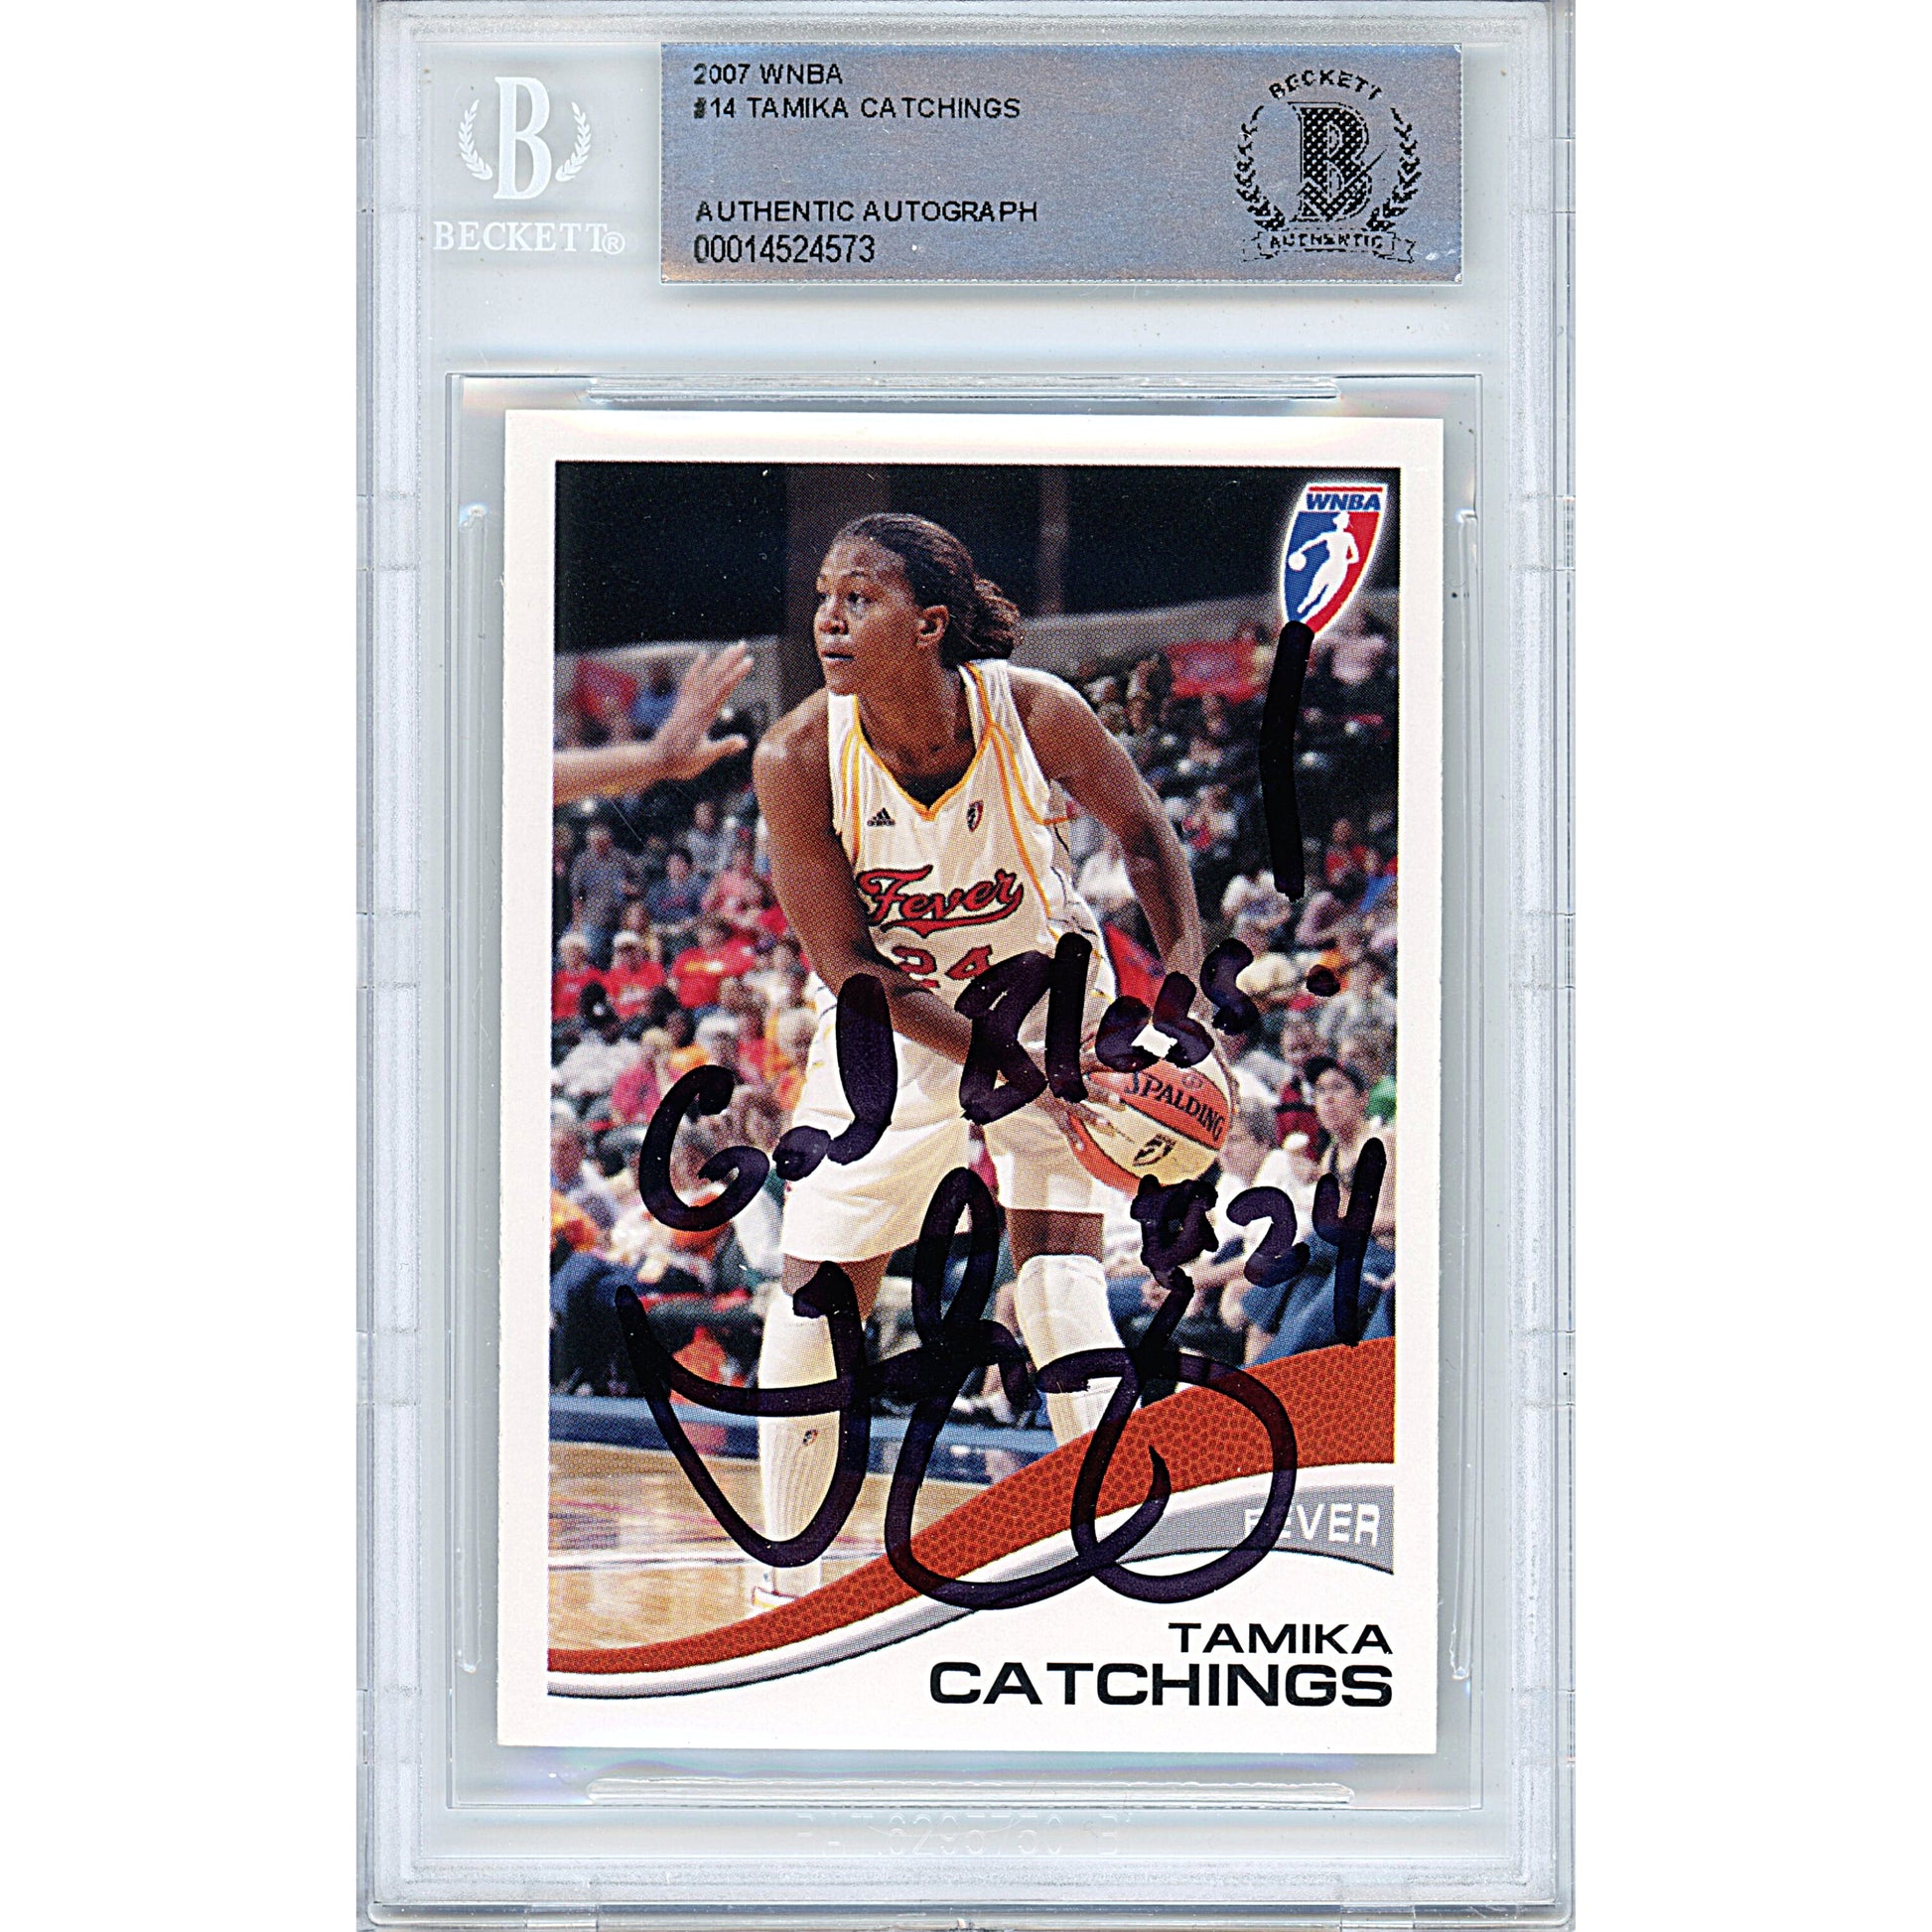 Basketballs- Autographed- Tamika Catchings Signed Indiana Fever 2007 WNBA Basketball Card Beckett Slabbed 00014524573 - 101